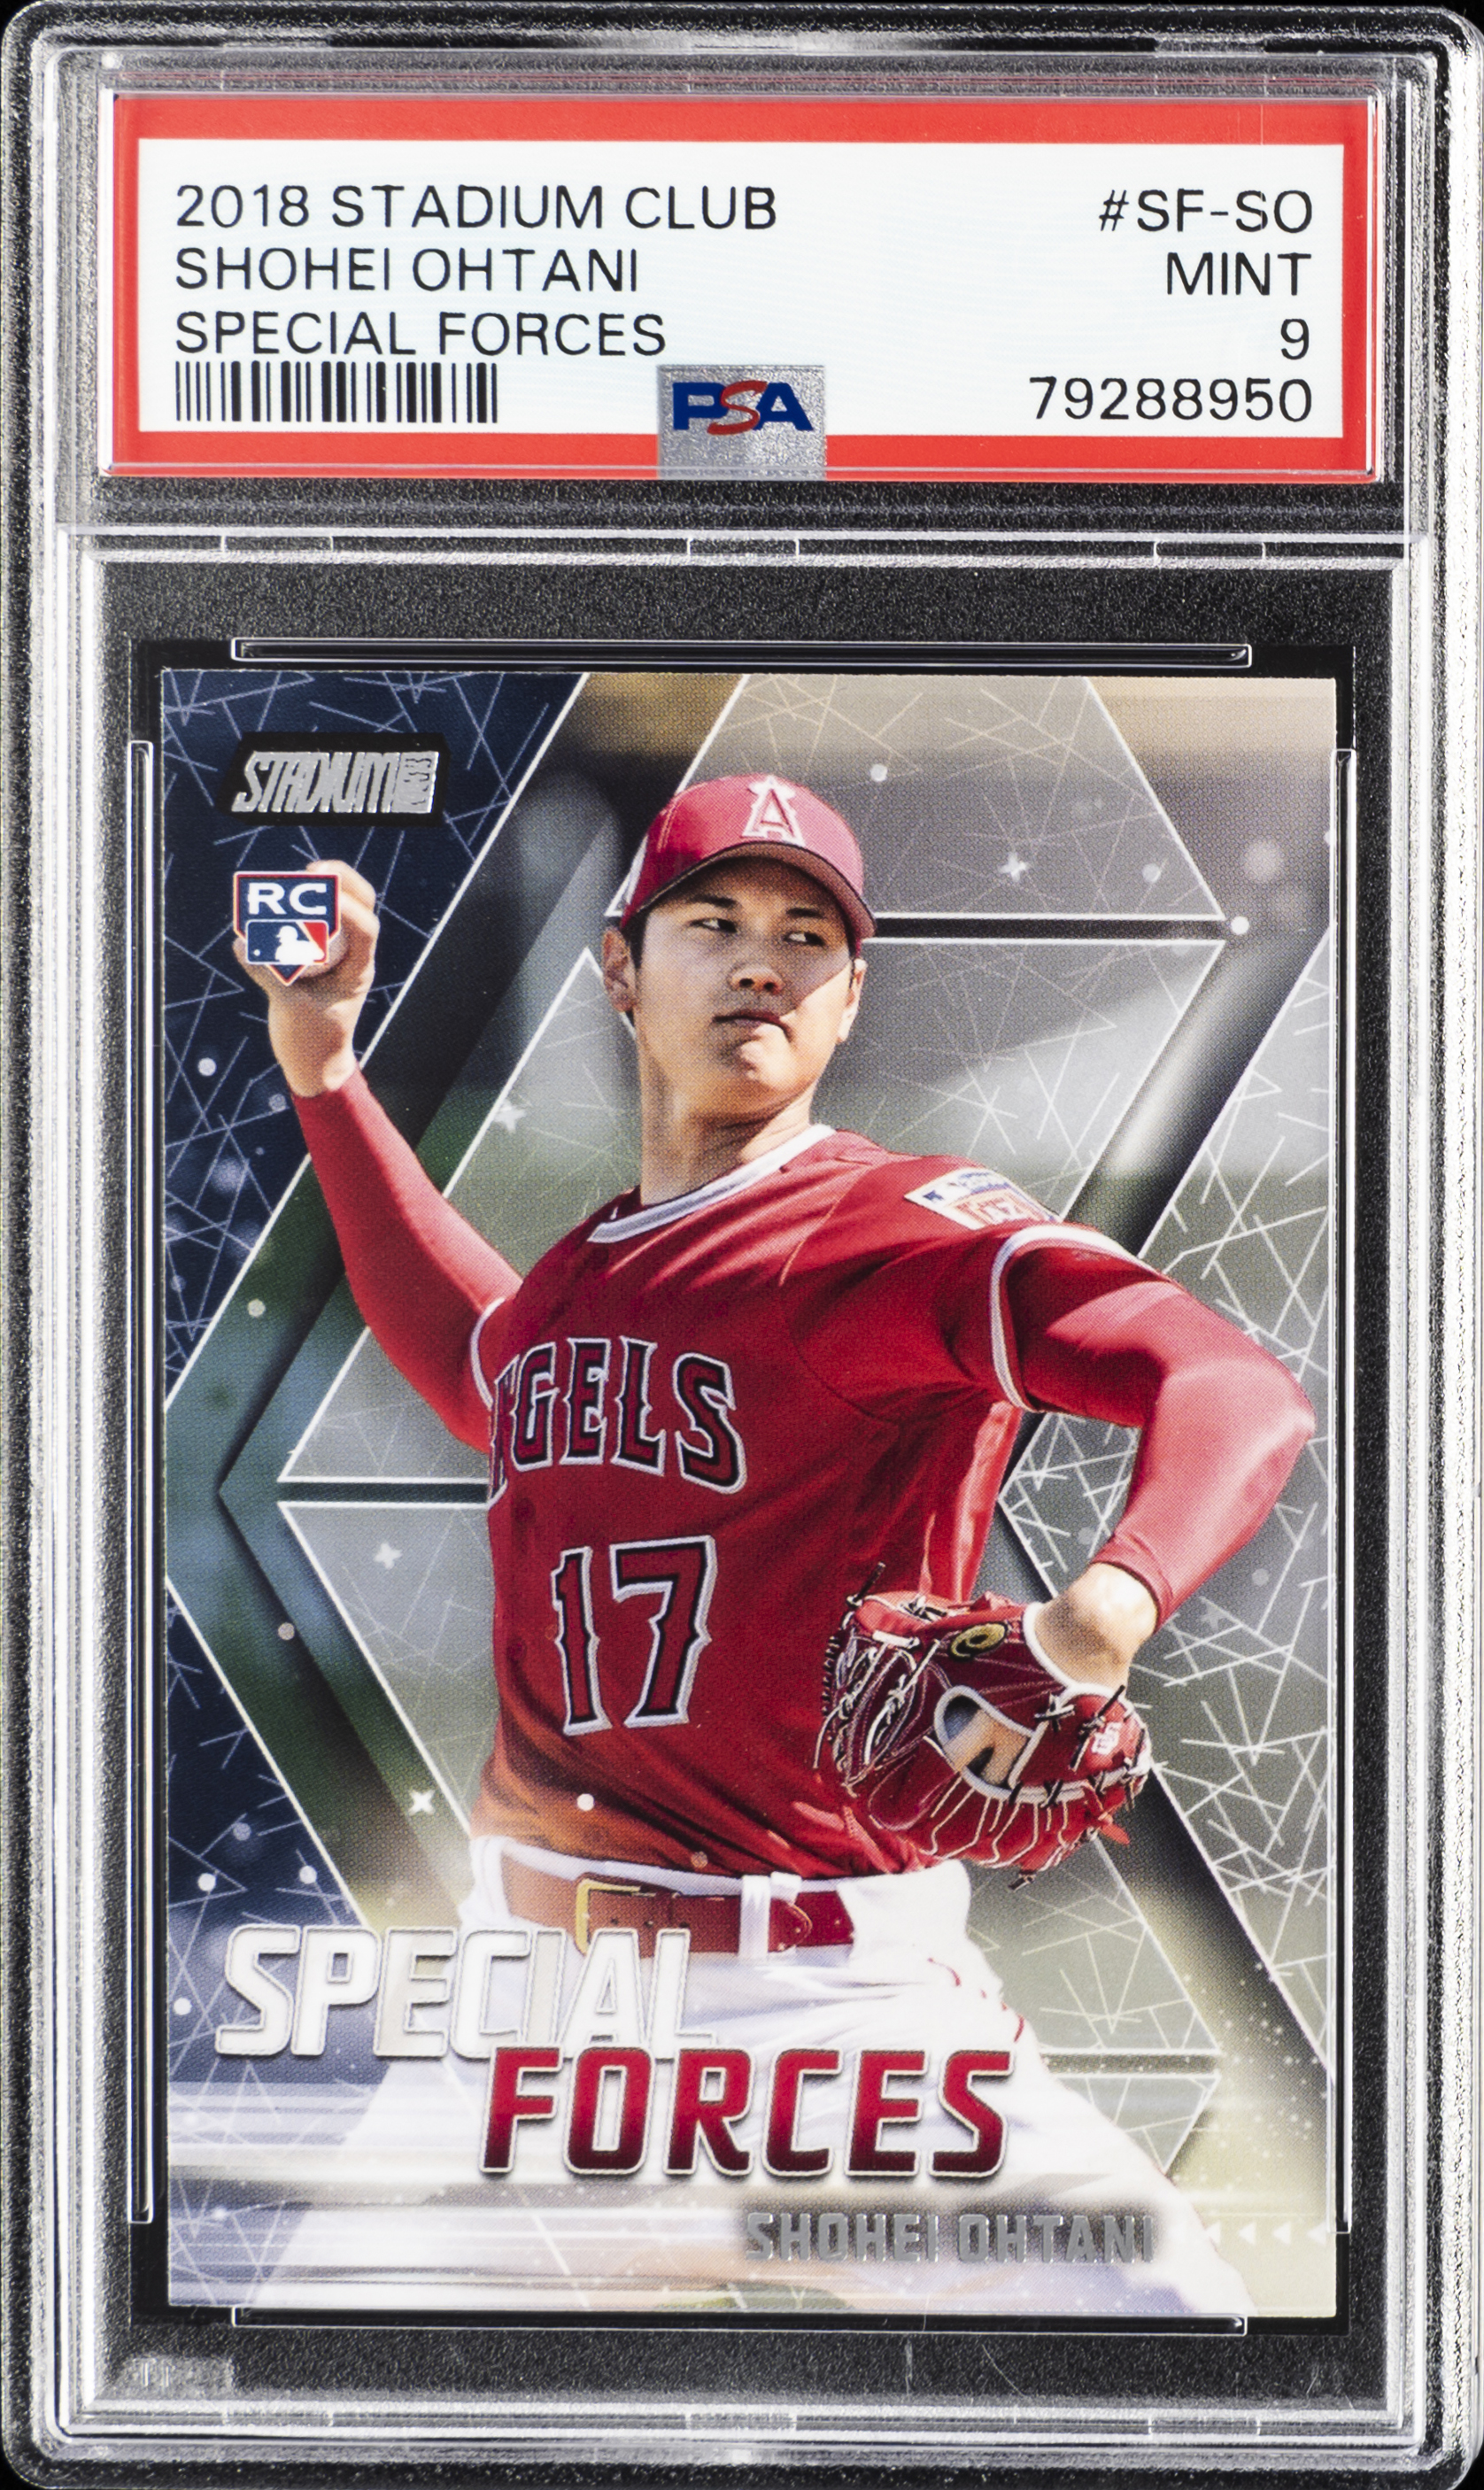 2018 Stadium Club Special Forces #SF-SO Shohei Ohtani Rookie Card – PSA MINT 9